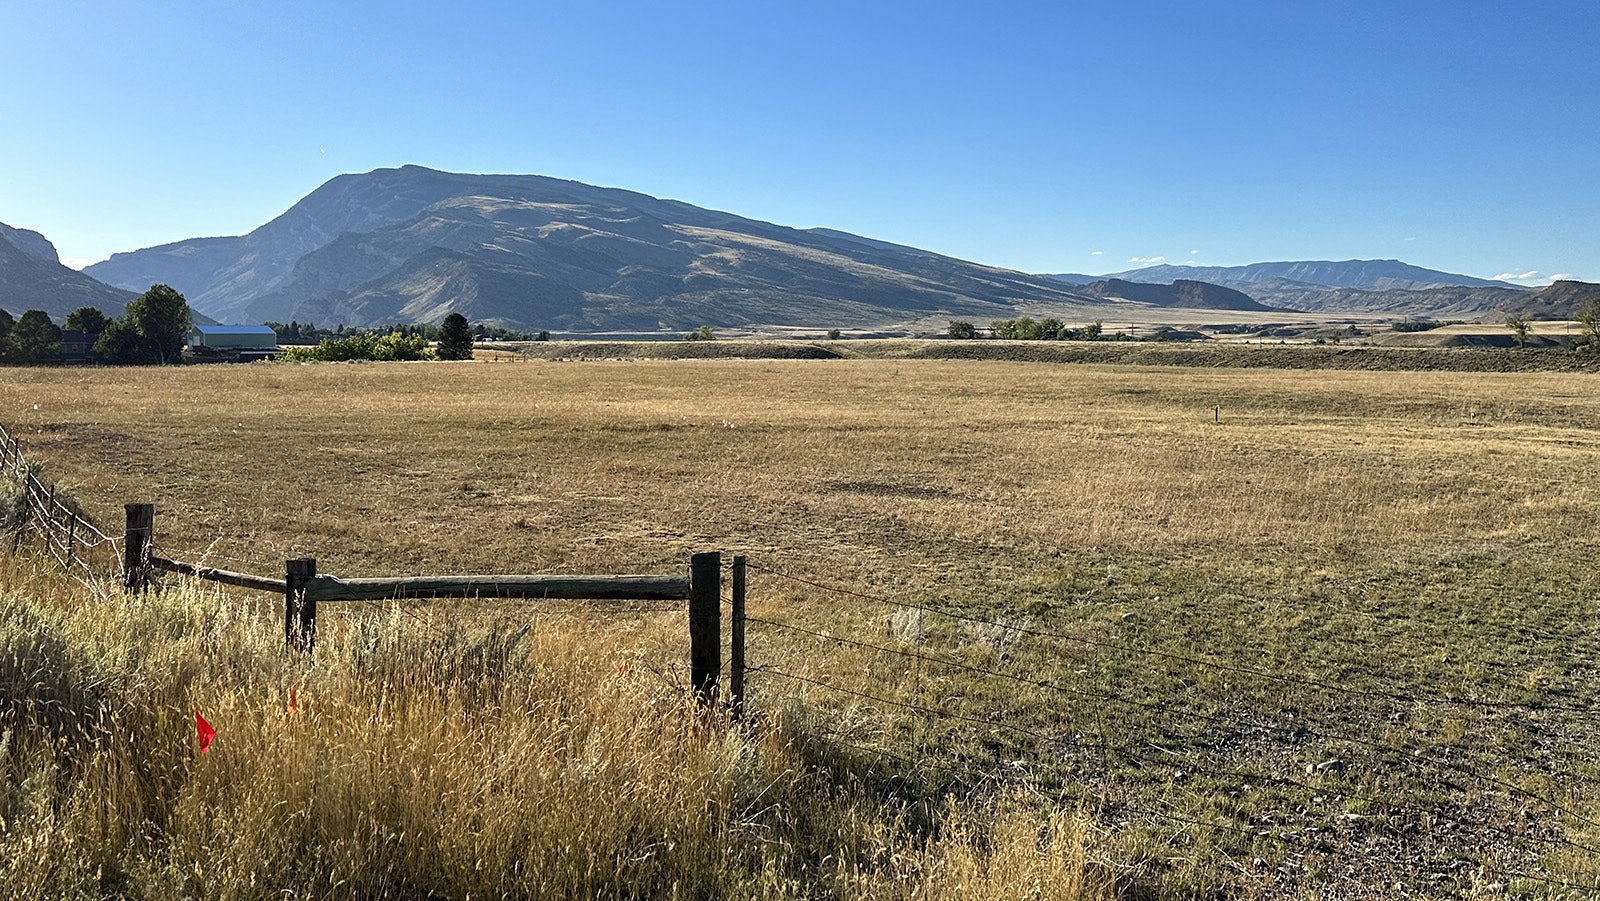 The site for a proposed Church of Jesus Christ of Latter-day Saints temple in Cody, Wyoming.